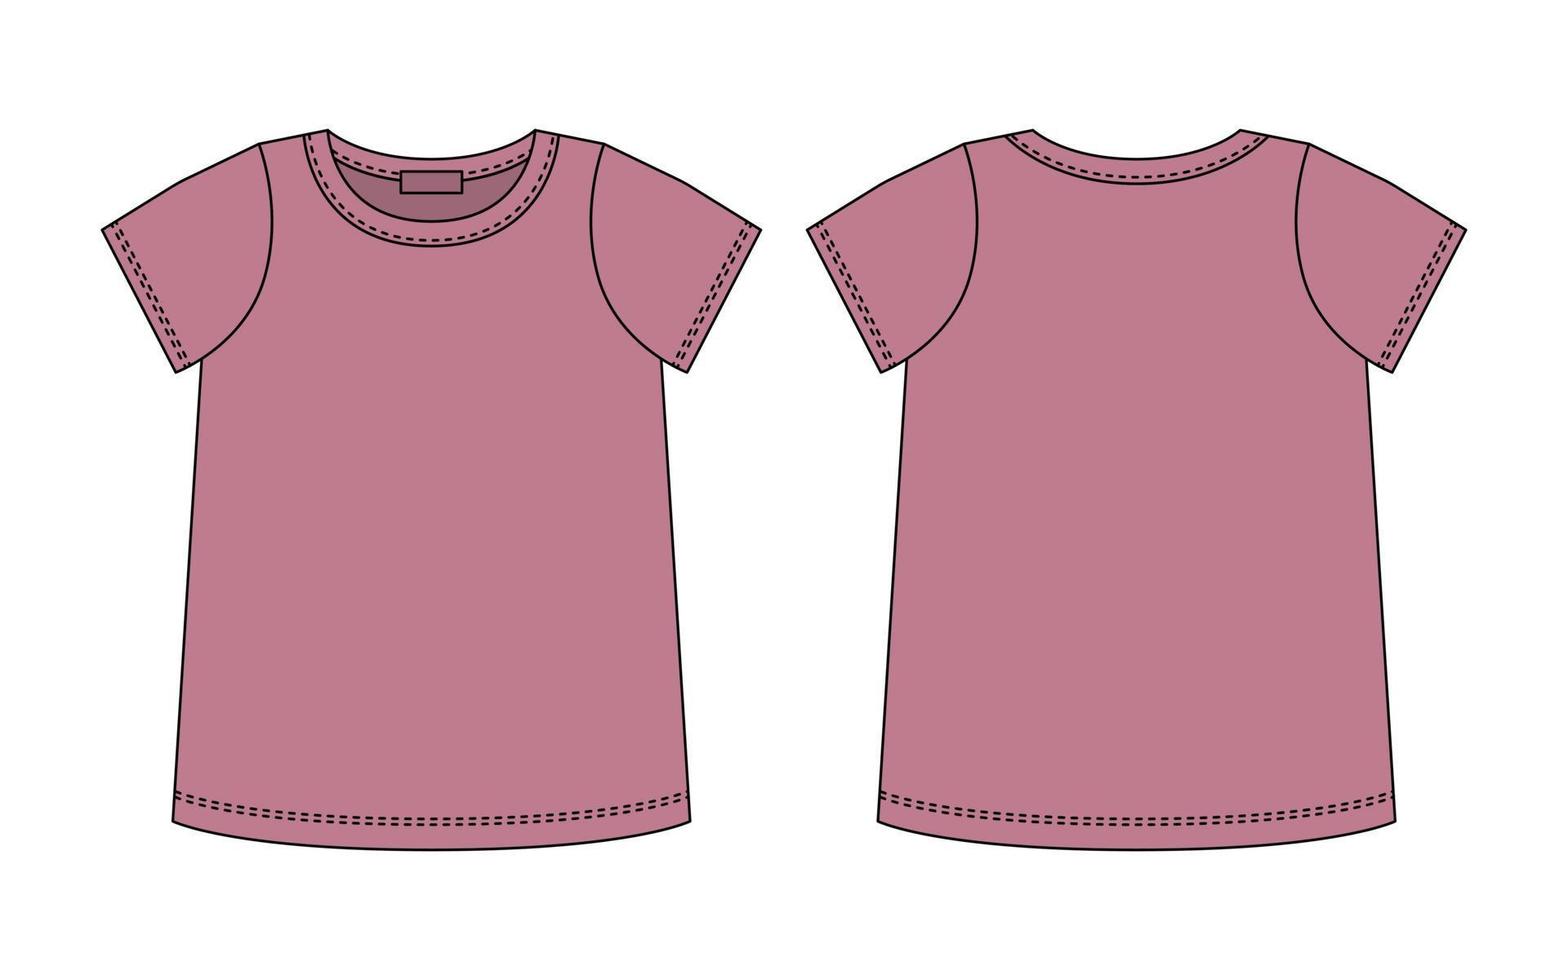 Blank t shirt technical sketch. Pudra color. Female T-shirt outline design template vector